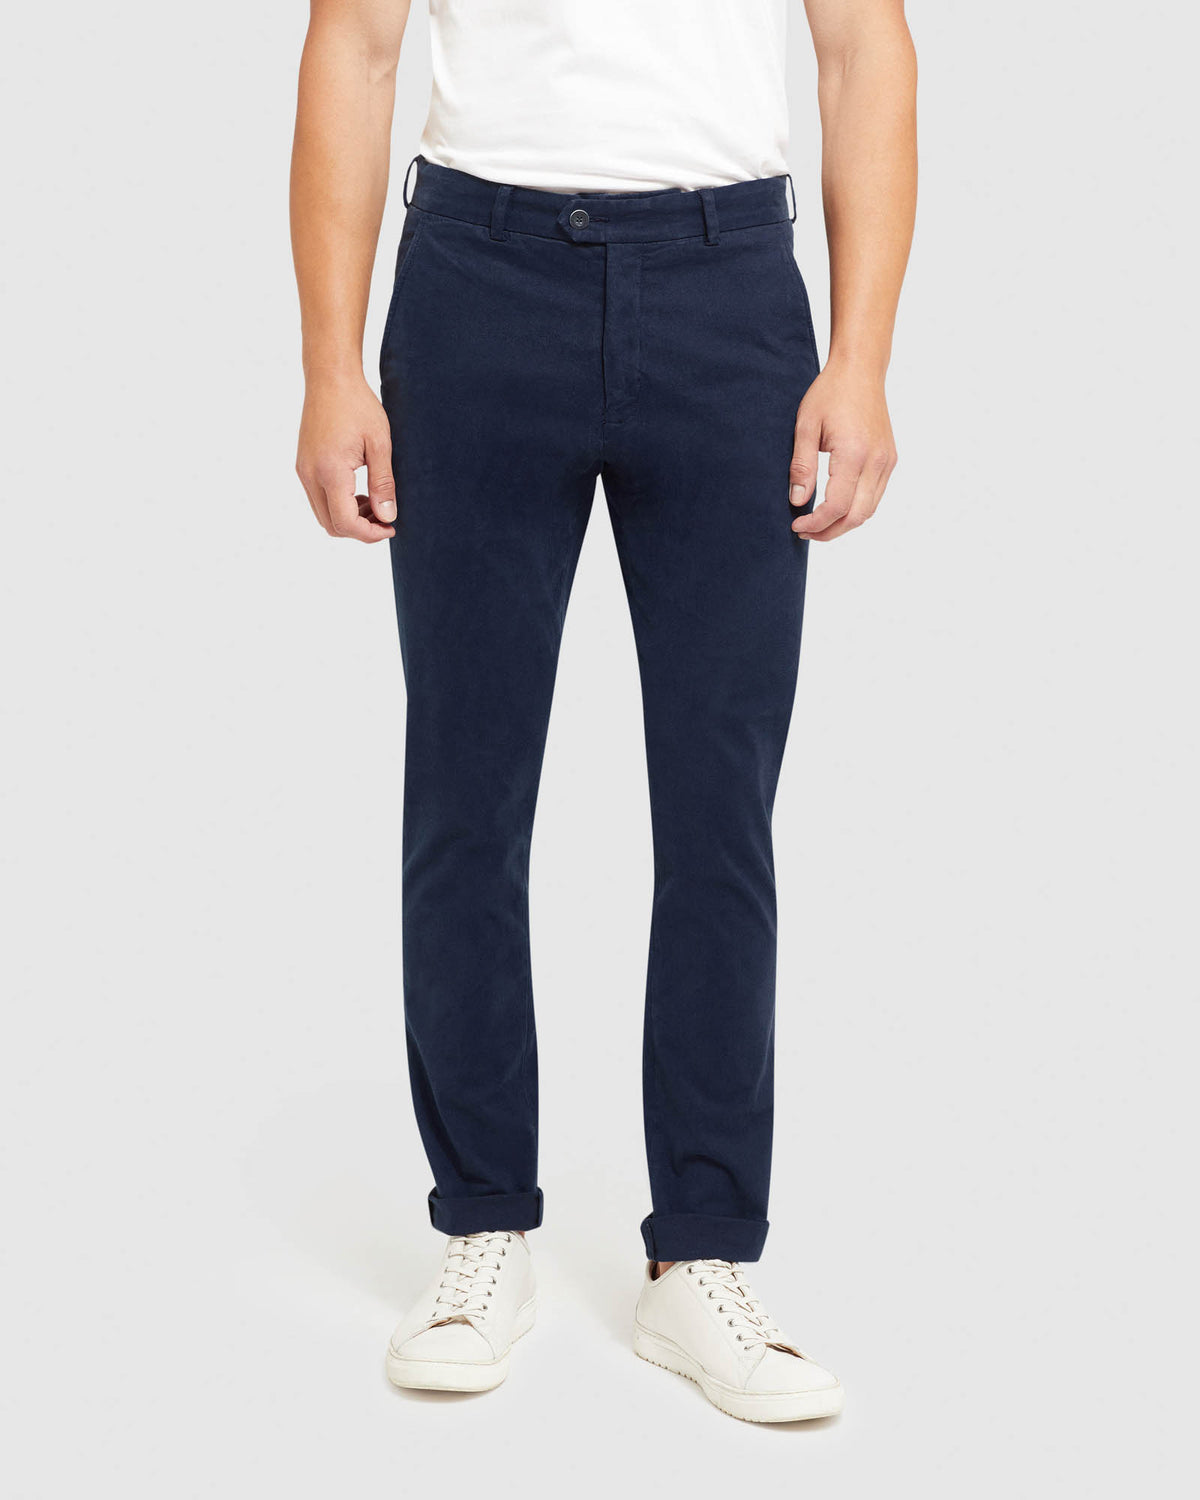 Buy Stylish Pants and Trousers for Men Online at Fabindia